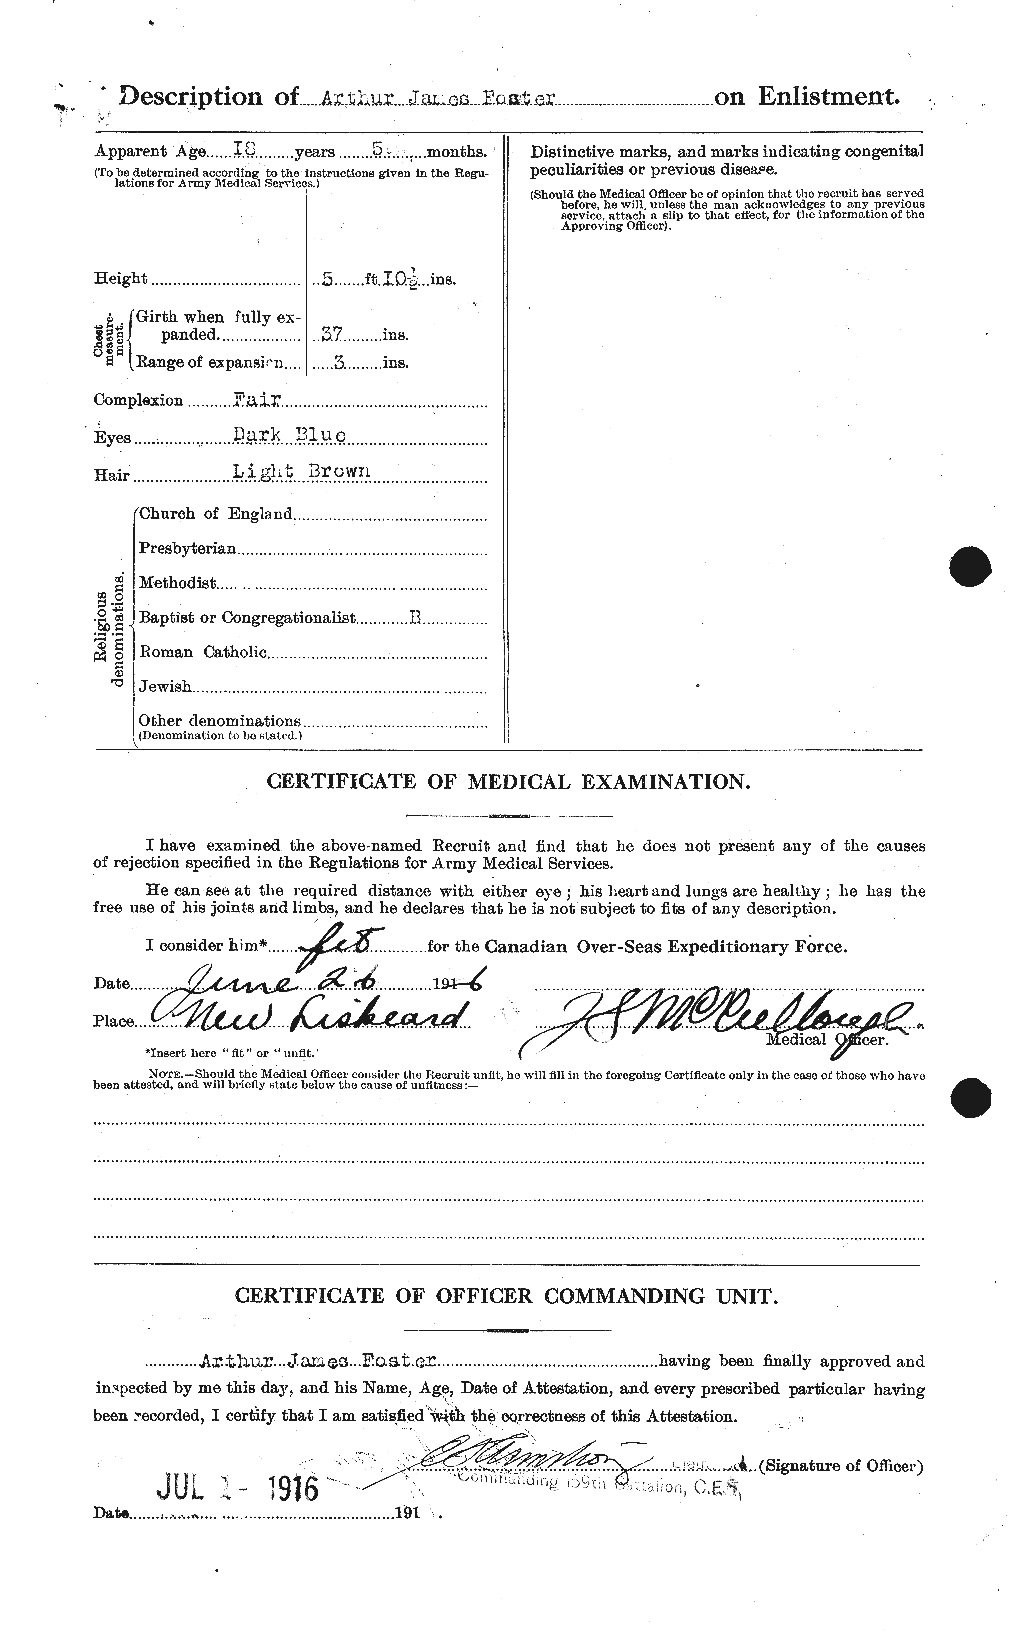 Personnel Records of the First World War - CEF 330475b